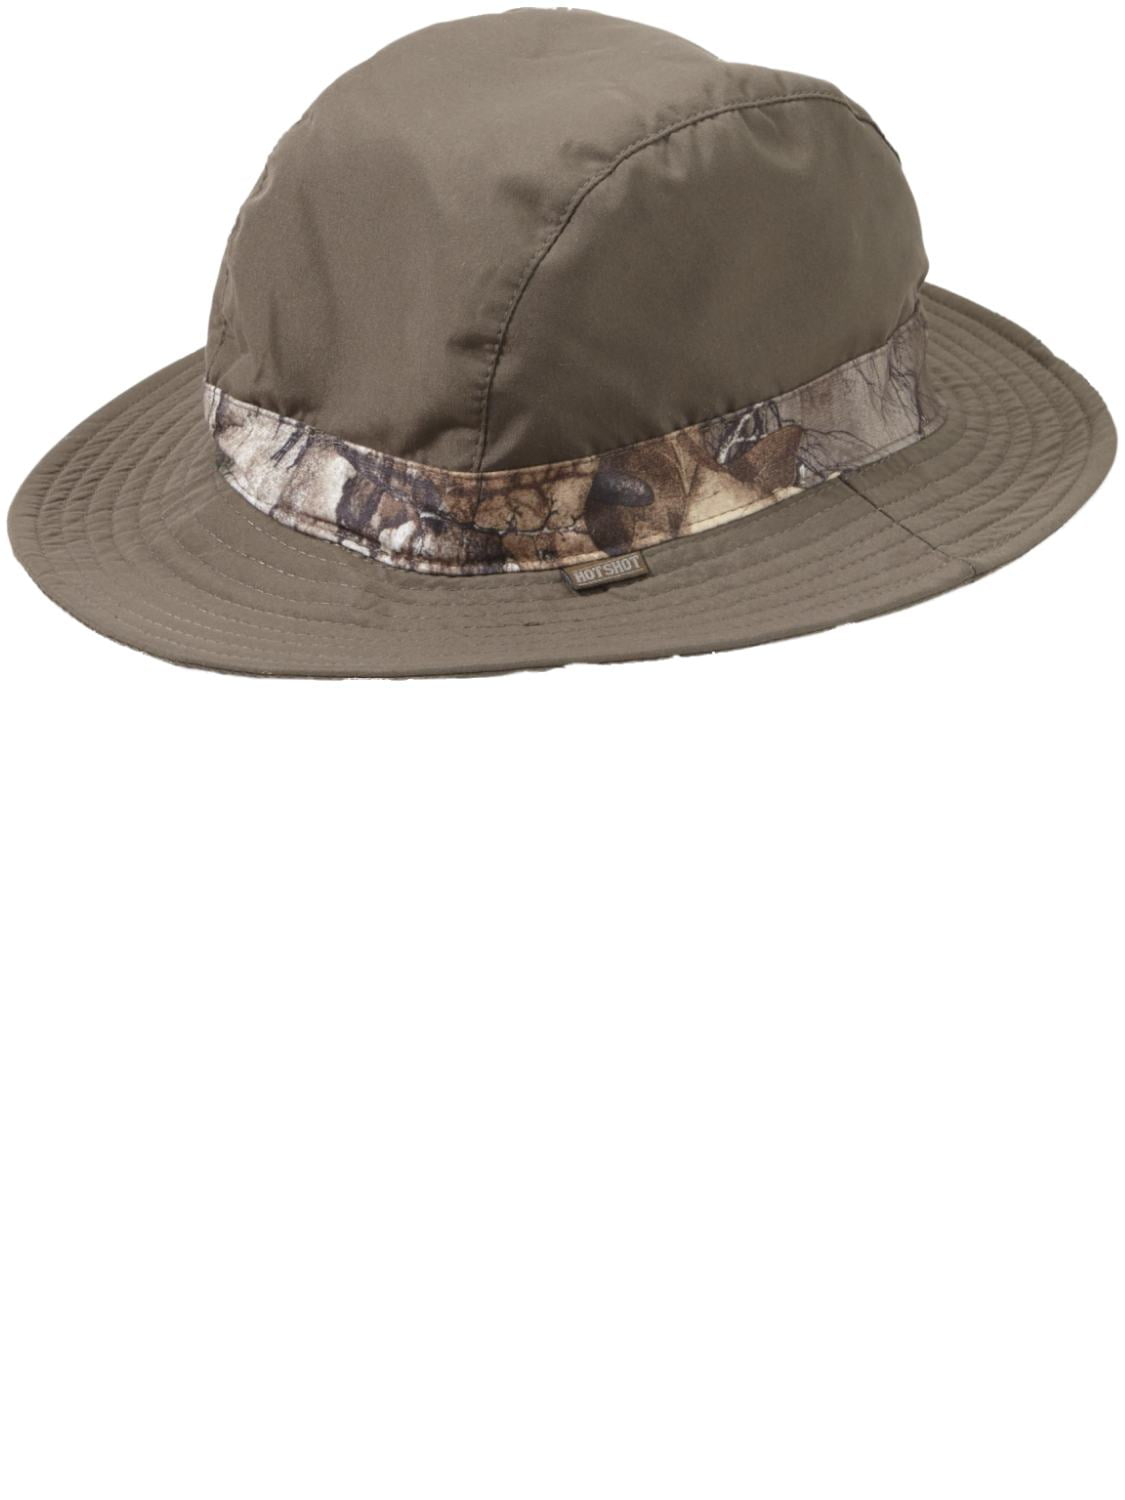 Mens Olive Green Camouflage Goretex Boonie Style Hat Wide Brimmed Cap ...